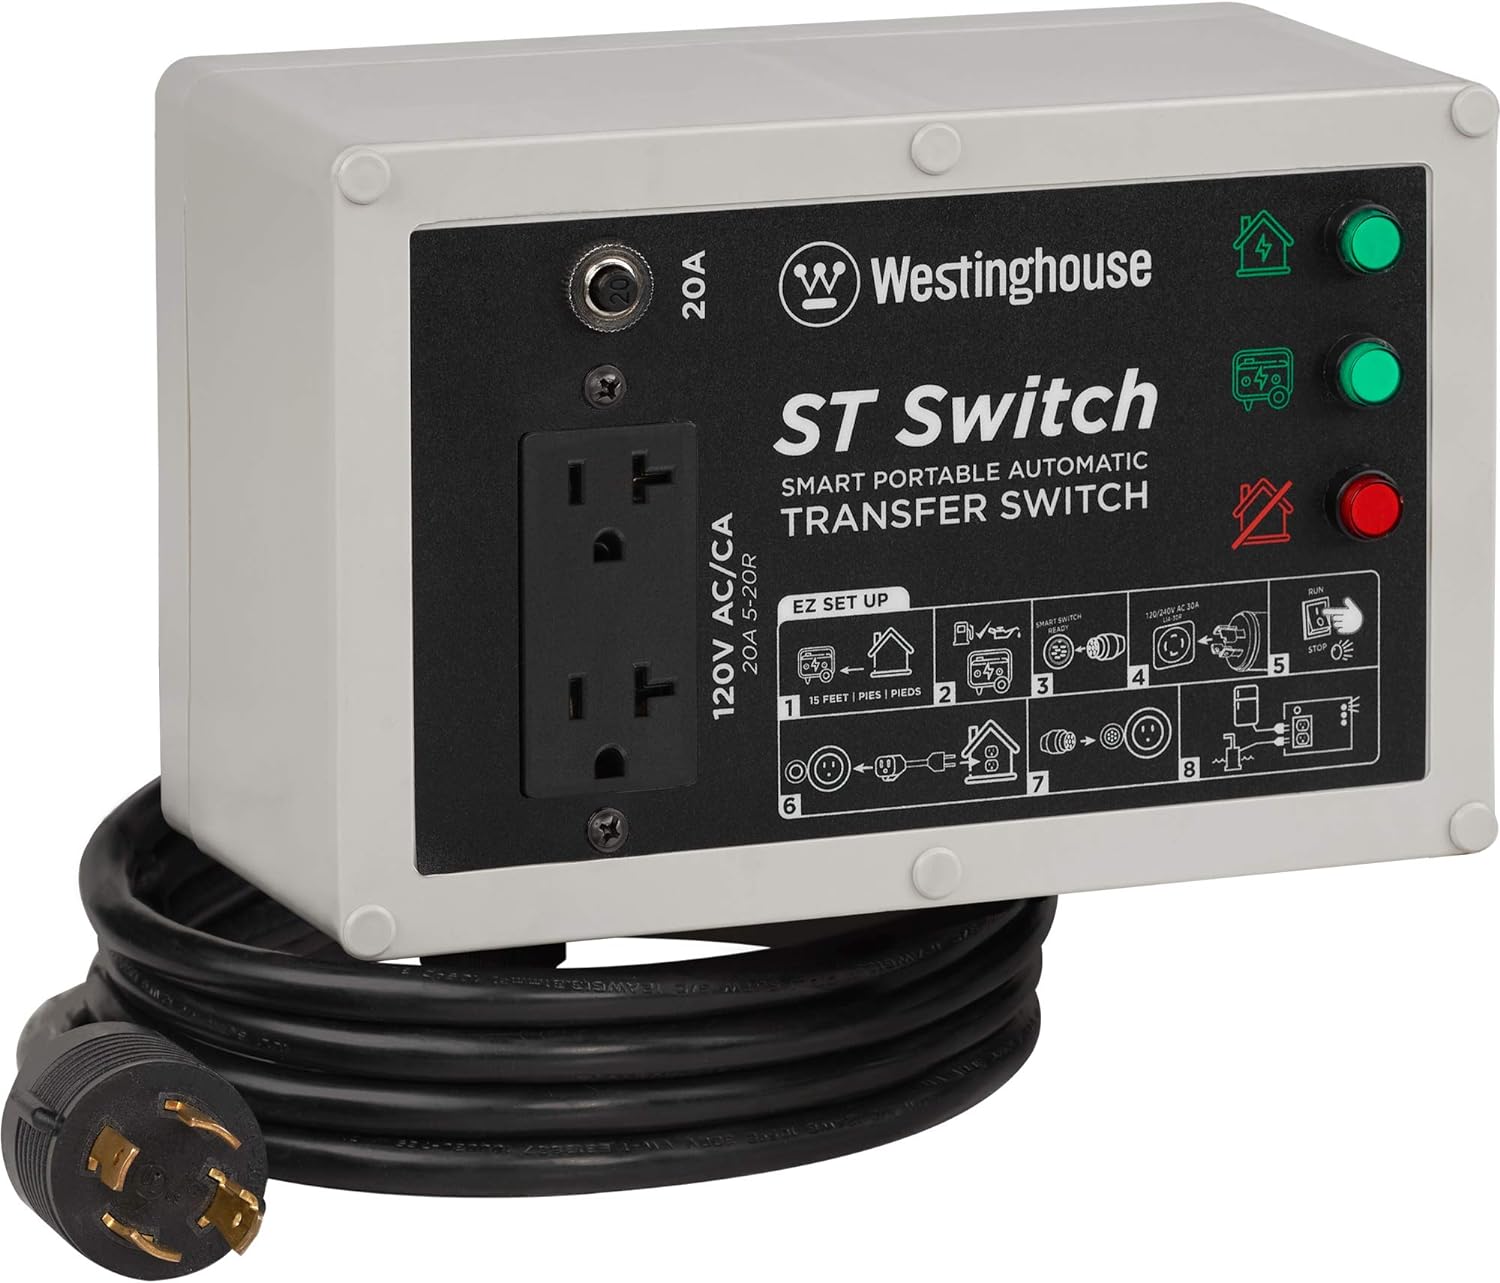 Westinghouse Outdoor Power Equipment ST Switch with Smart Portable Automatic Transfer Technology Home Standby Alternative, For Sump Pumps, Refrigerators, and More, Black and White - Westinghouse ST Switch Review